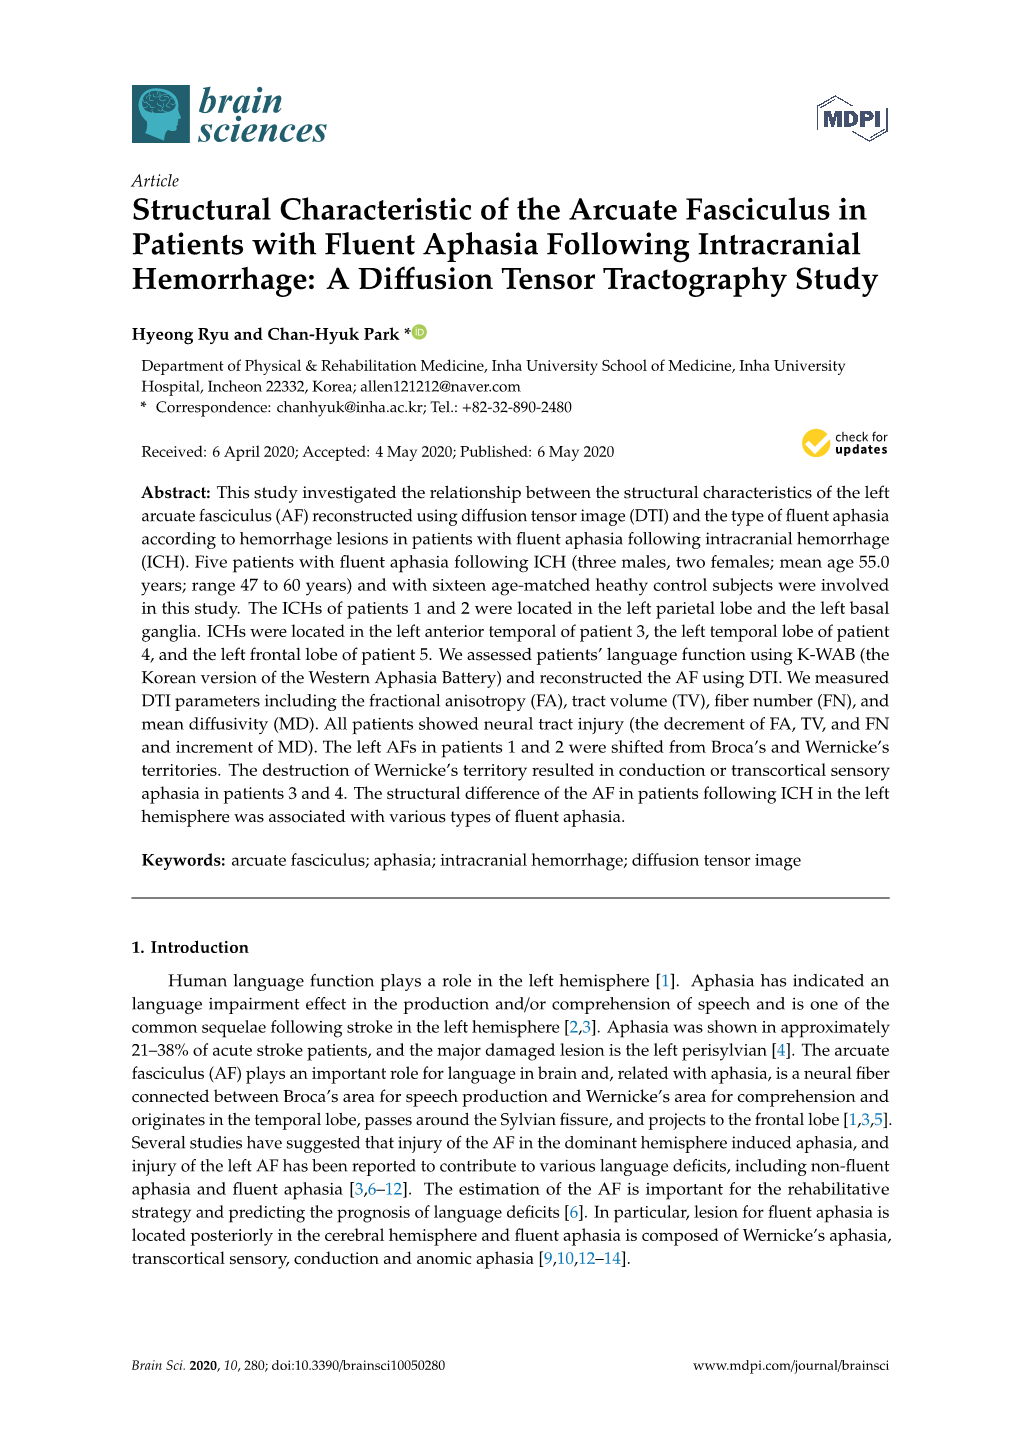 Structural Characteristic of the Arcuate Fasciculus in Patients with Fluent Aphasia Following Intracranial Hemorrhage: a Diﬀusion Tensor Tractography Study